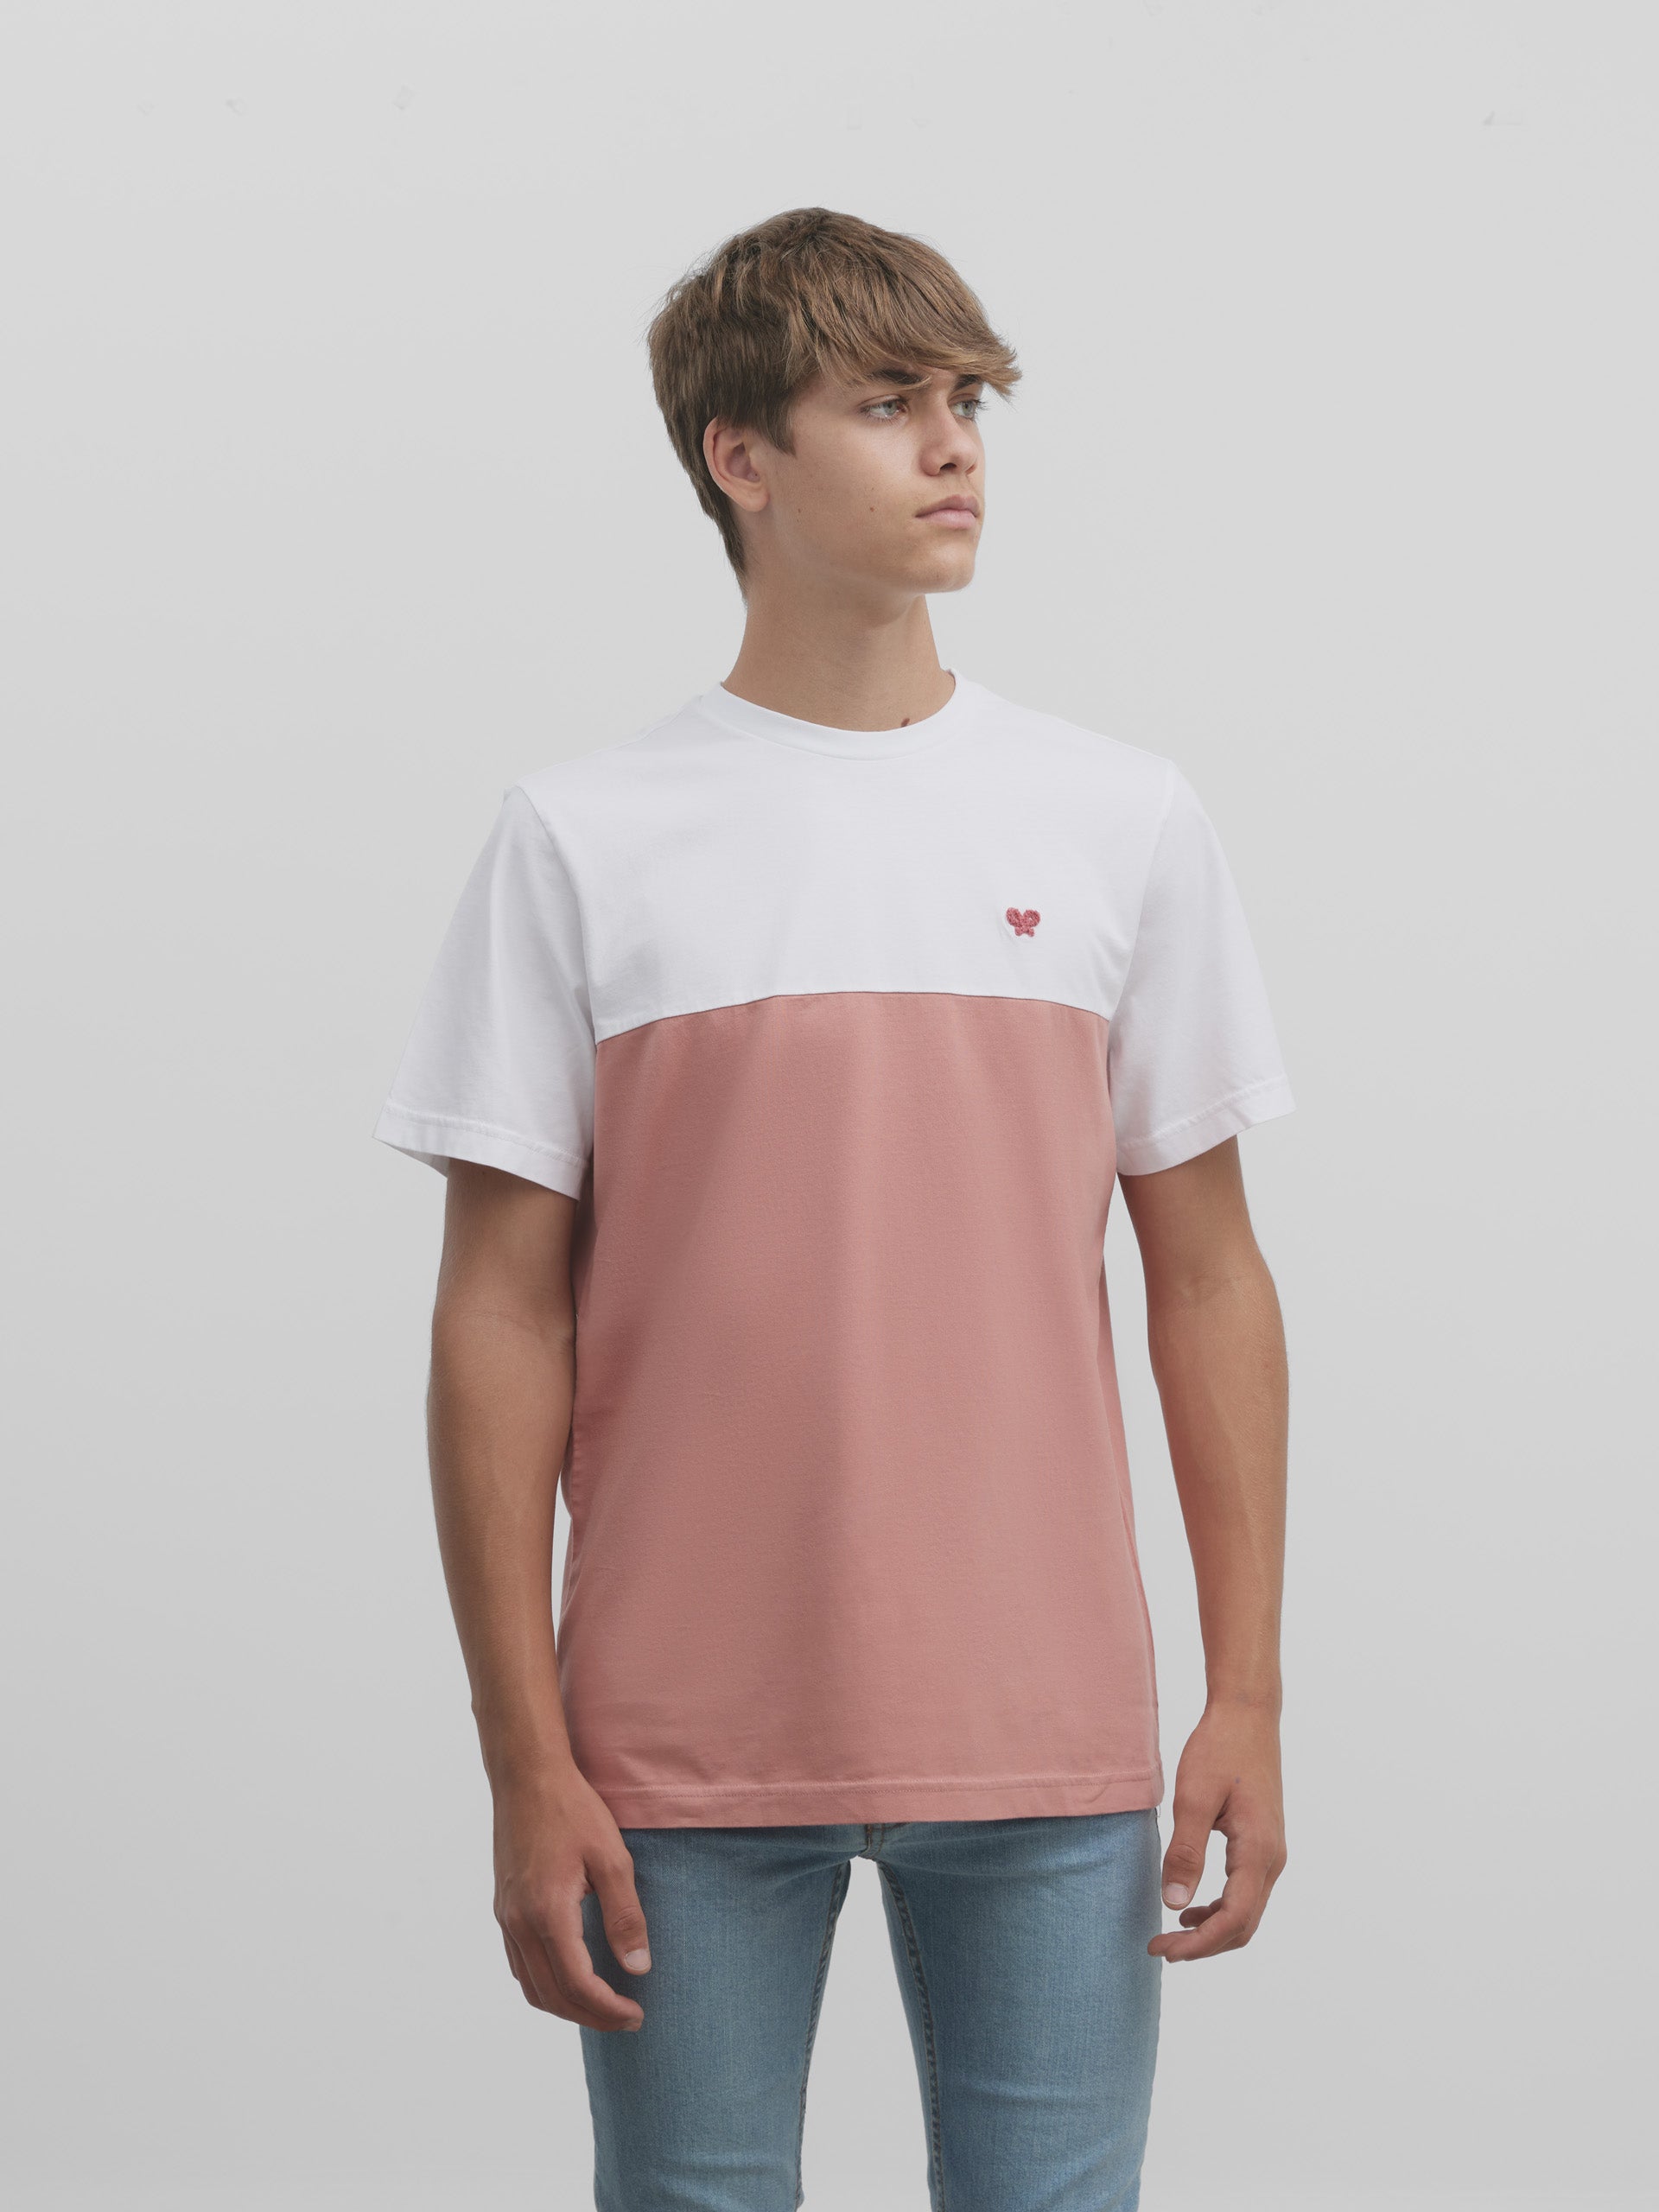 Two-tone white coral t-shirt